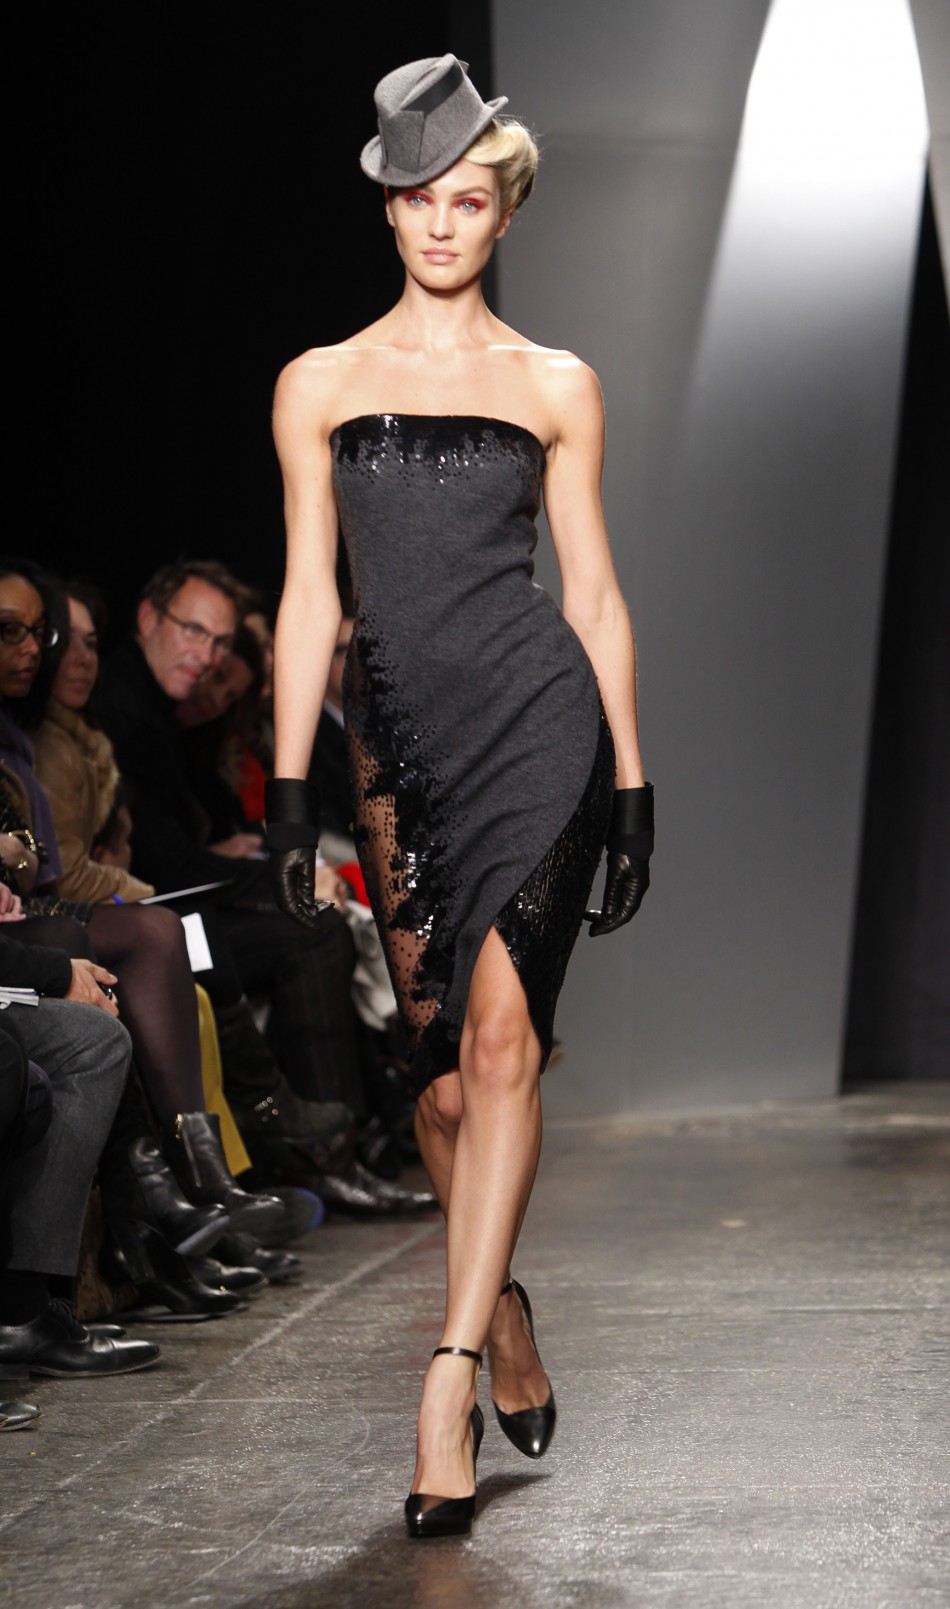 A model presents a creation at the Donna Karen New York FallWinter 2012 collection during New York Fashion Week